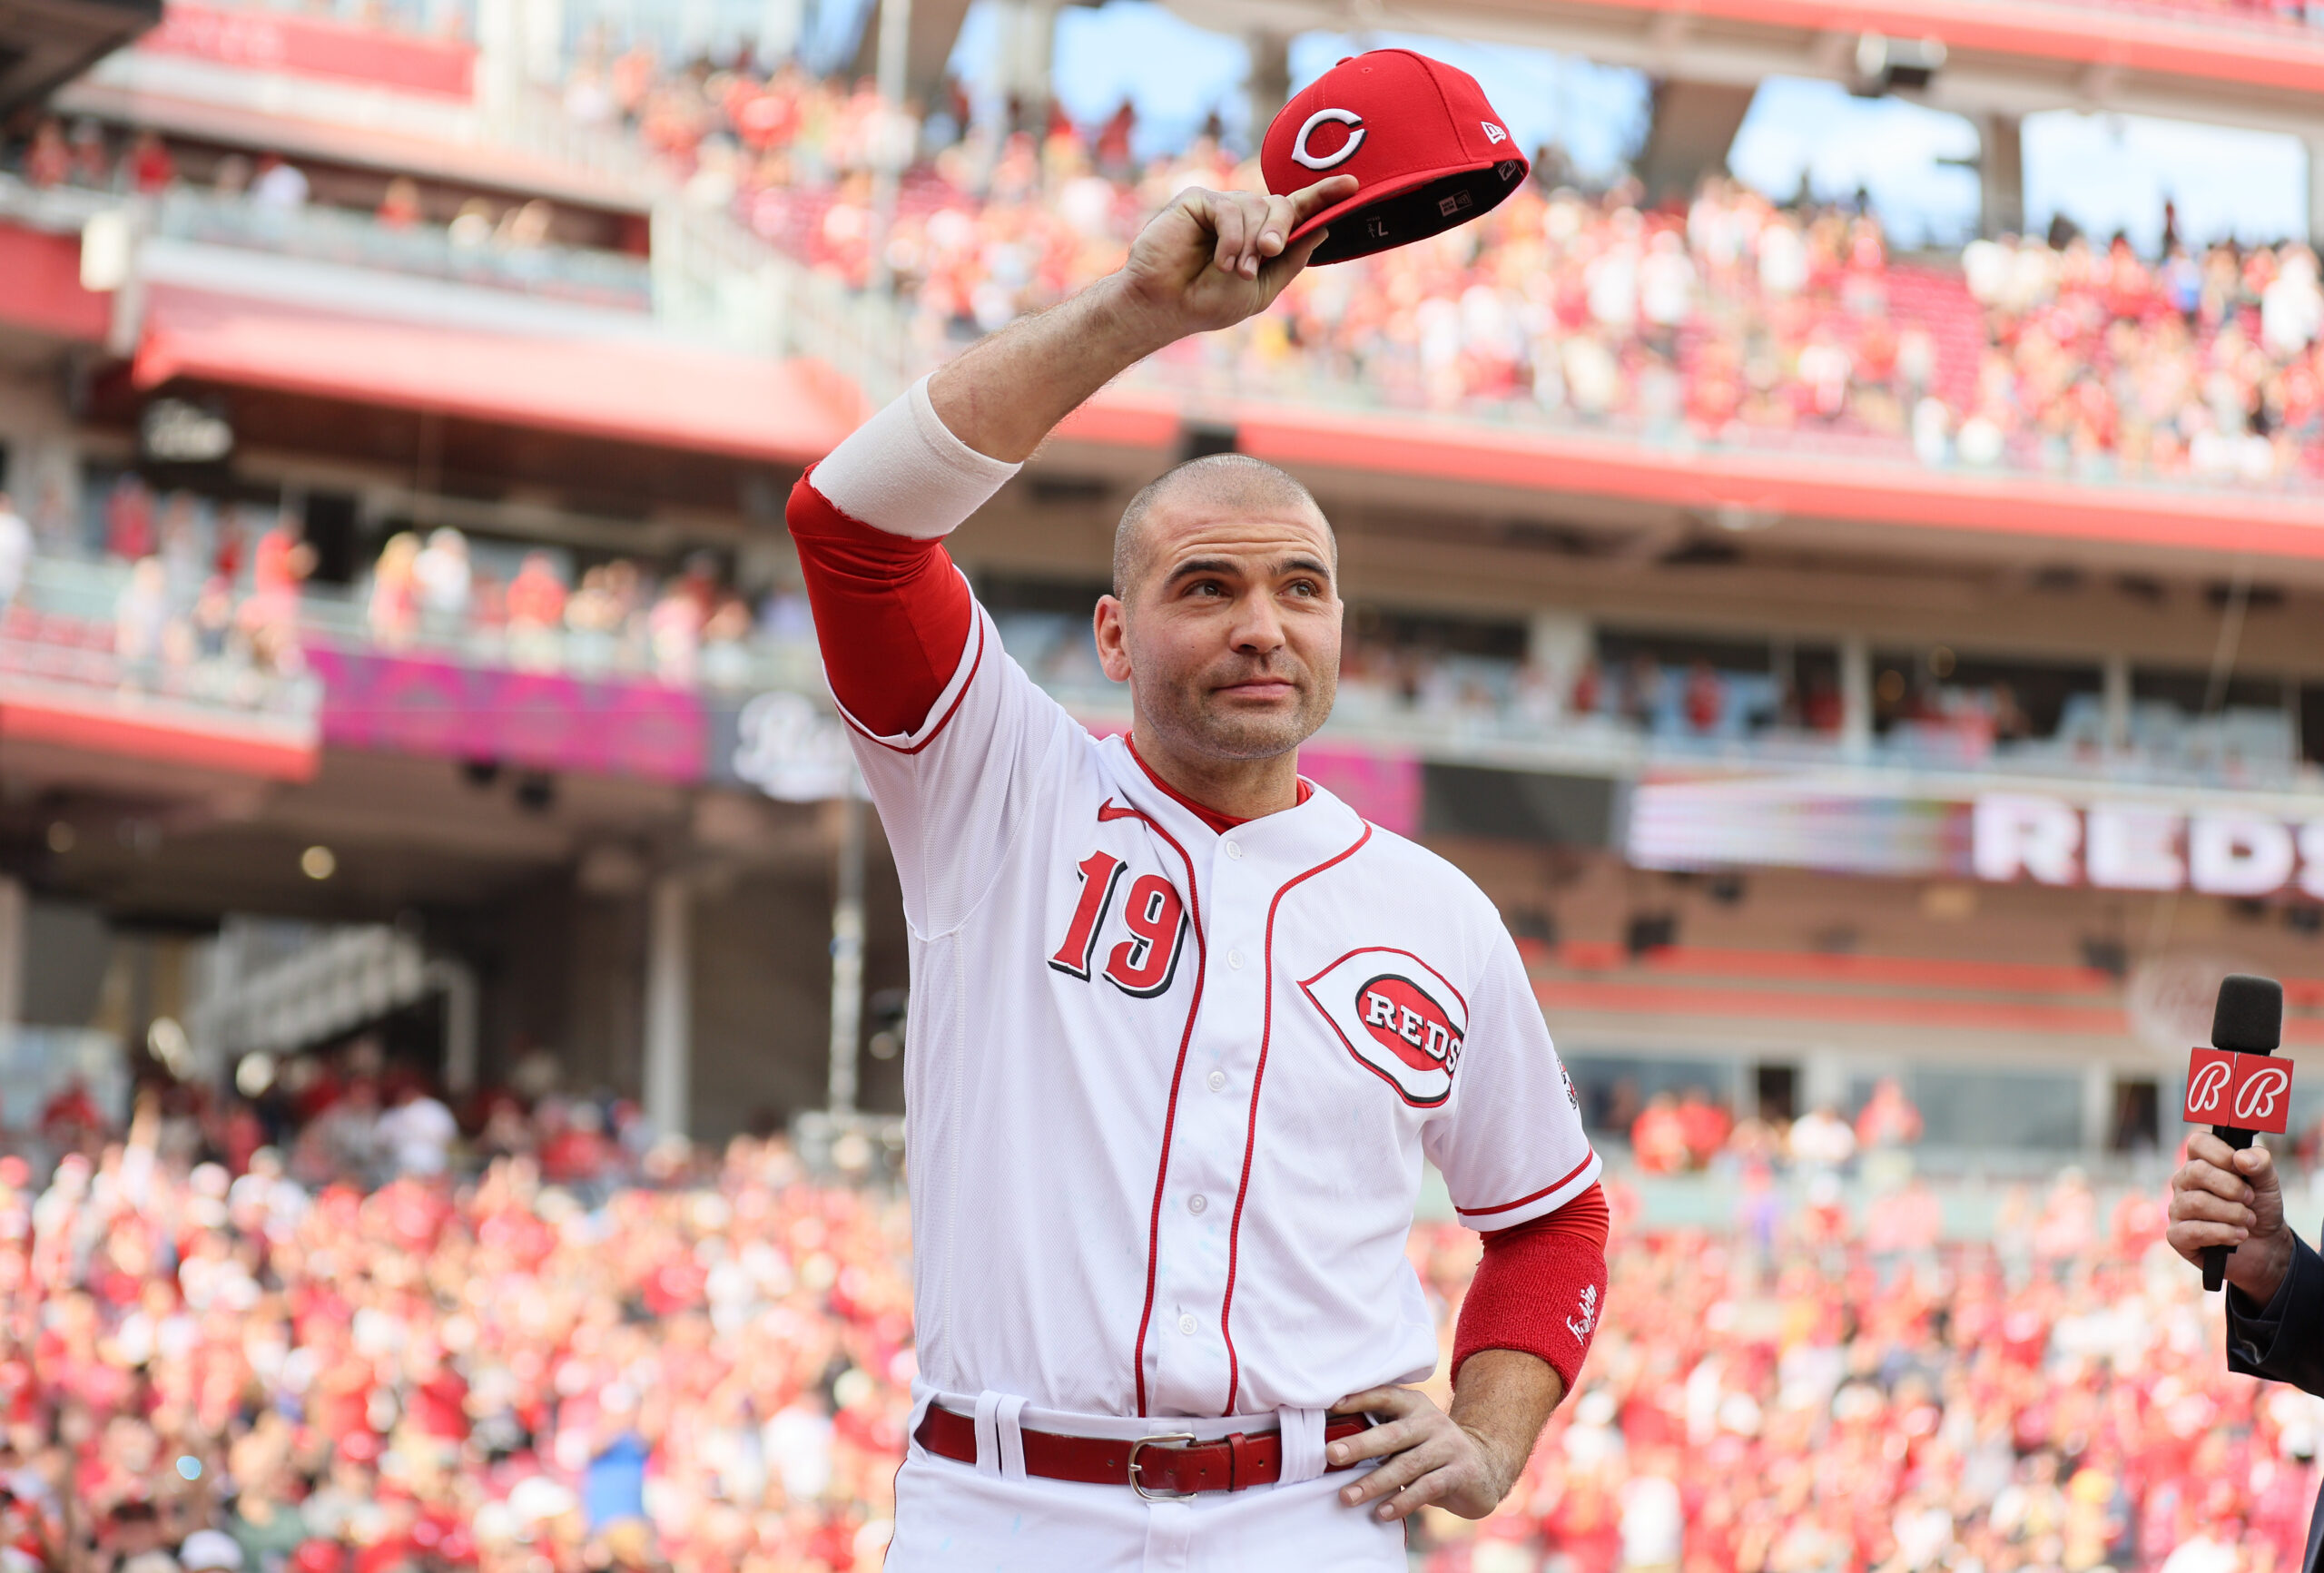 Joey Votto is not gay